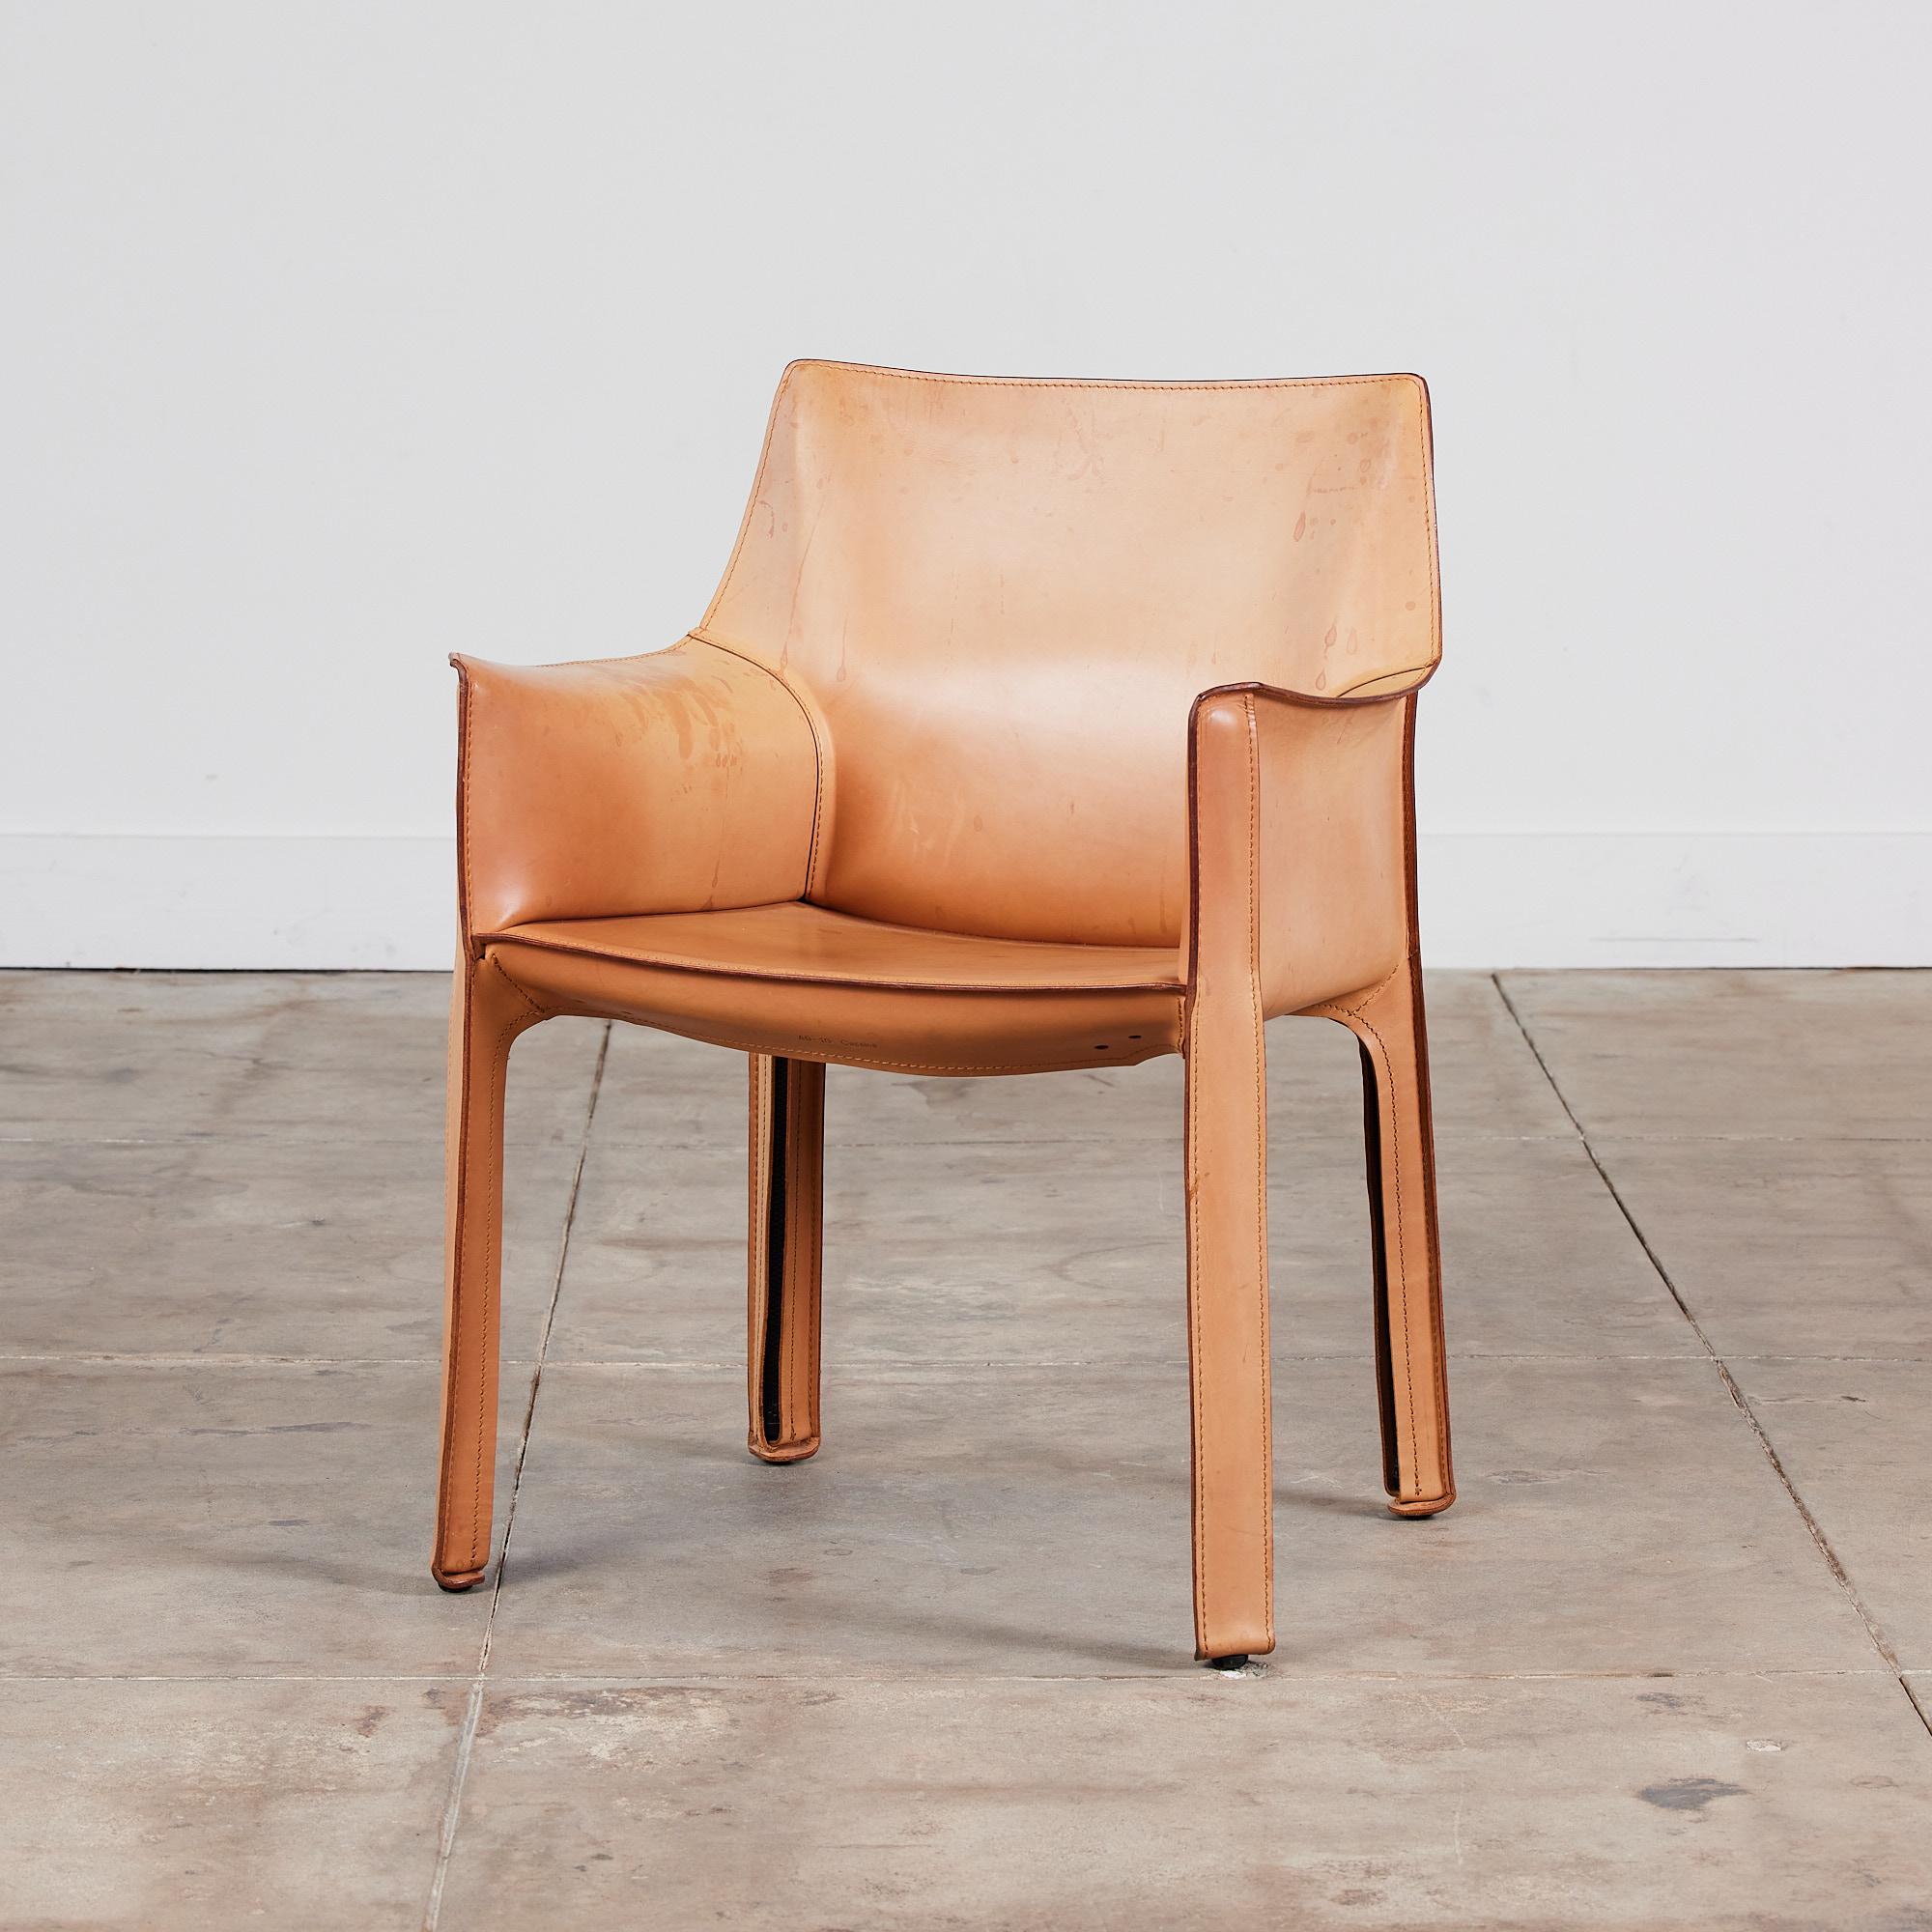 This iconic chair designed by Mario Bellini for Cassina c.1970s, Italy, features the original cognac saddle leather which is wrapped atop a steel frame. The back legs feature a black zippered detail. The chair can easily be used for dining or an